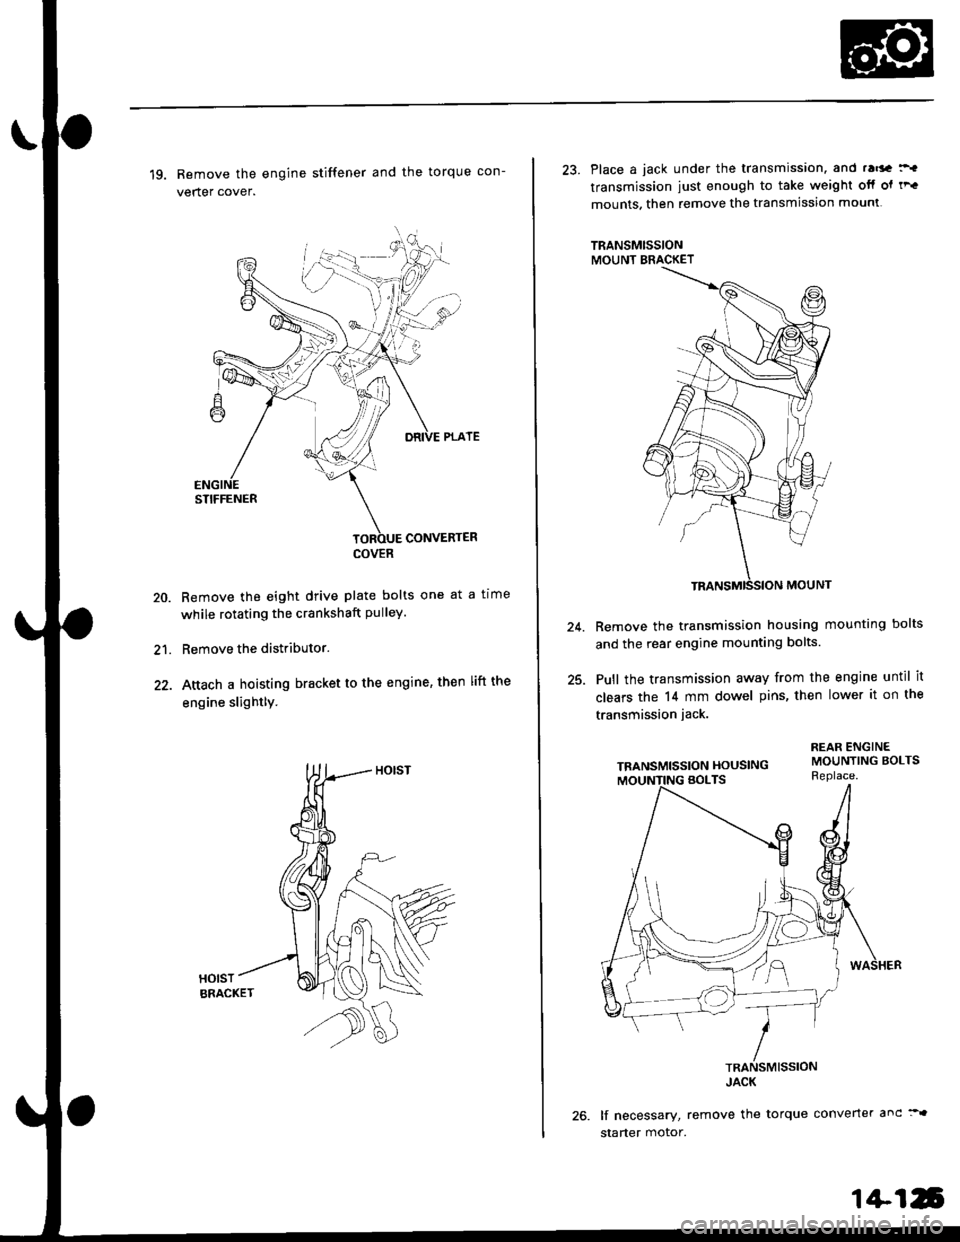 HONDA CIVIC 1997 6.G User Guide 19. Remove the engine stiffener and the torque con-
verter cover.
Remove the eight drive plate bolts one at a tlme
while rotating the crankshaft pulley.
Remove the distributor.
Attach a hoisting brack